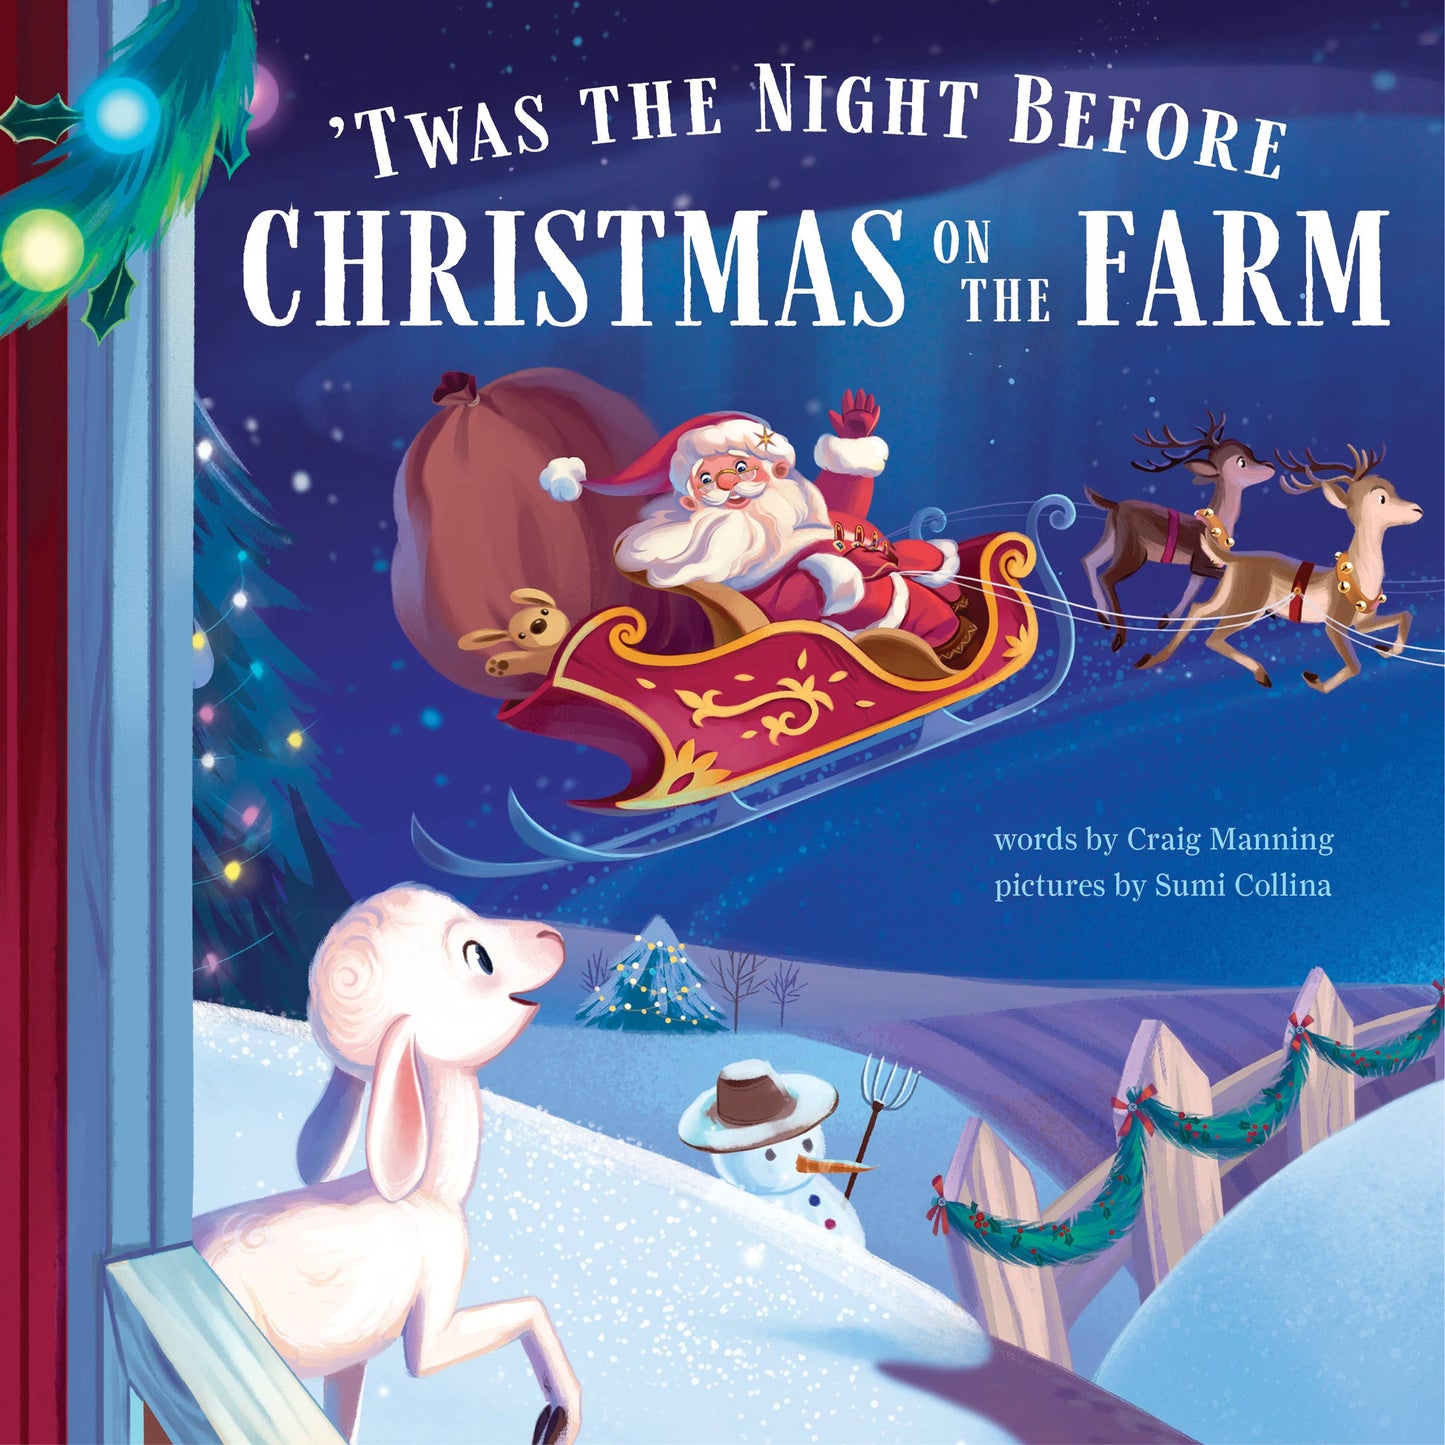 'Twas the Night Before Christmas on the Farm (hardcover)